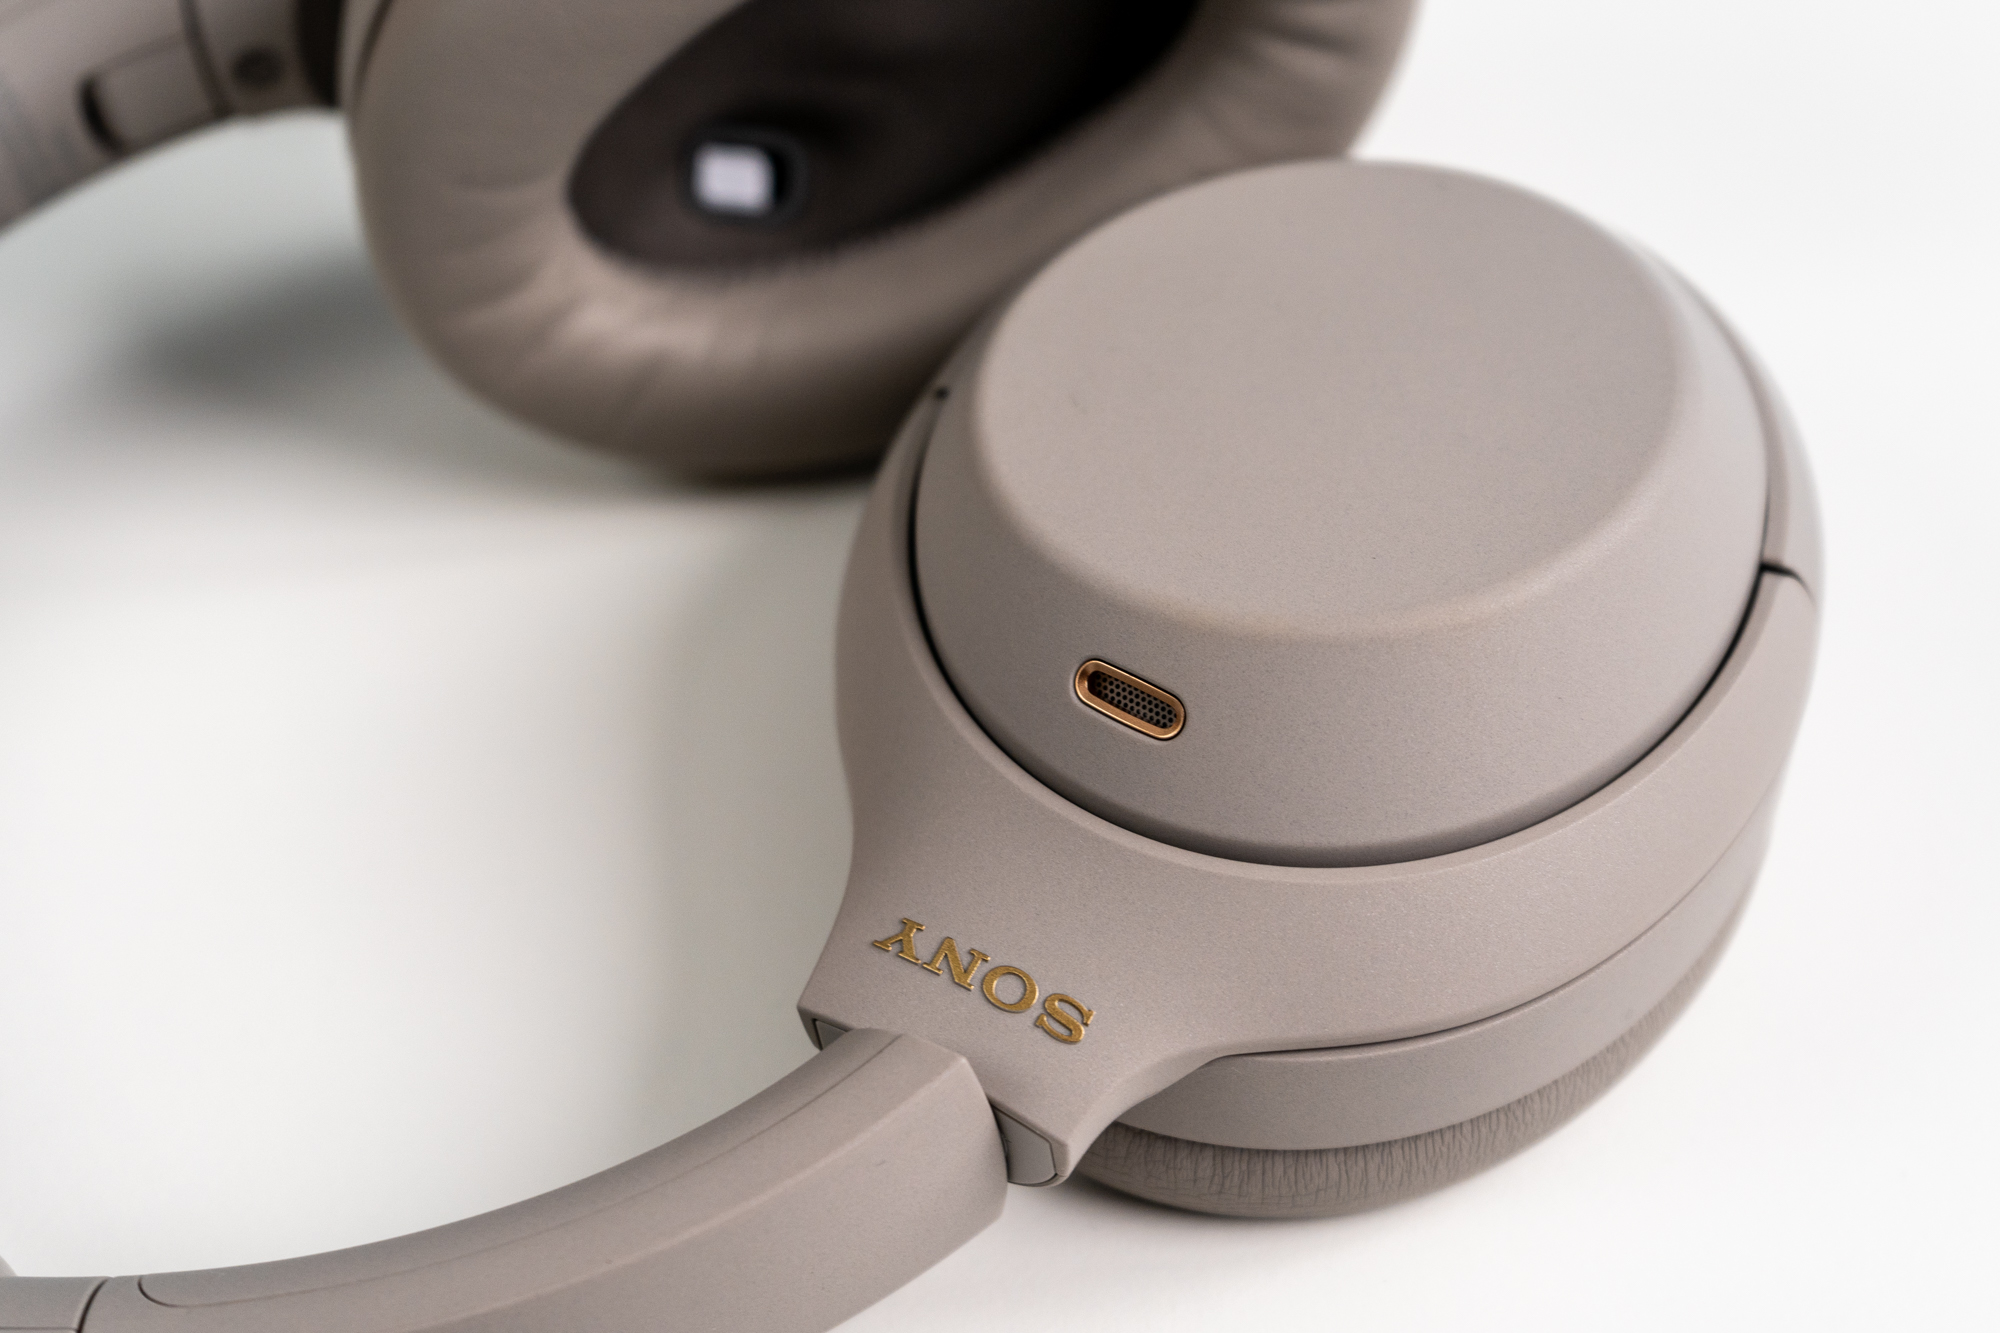 Sony WH-1000XM4 review: Still the best noise-cancelling headphones